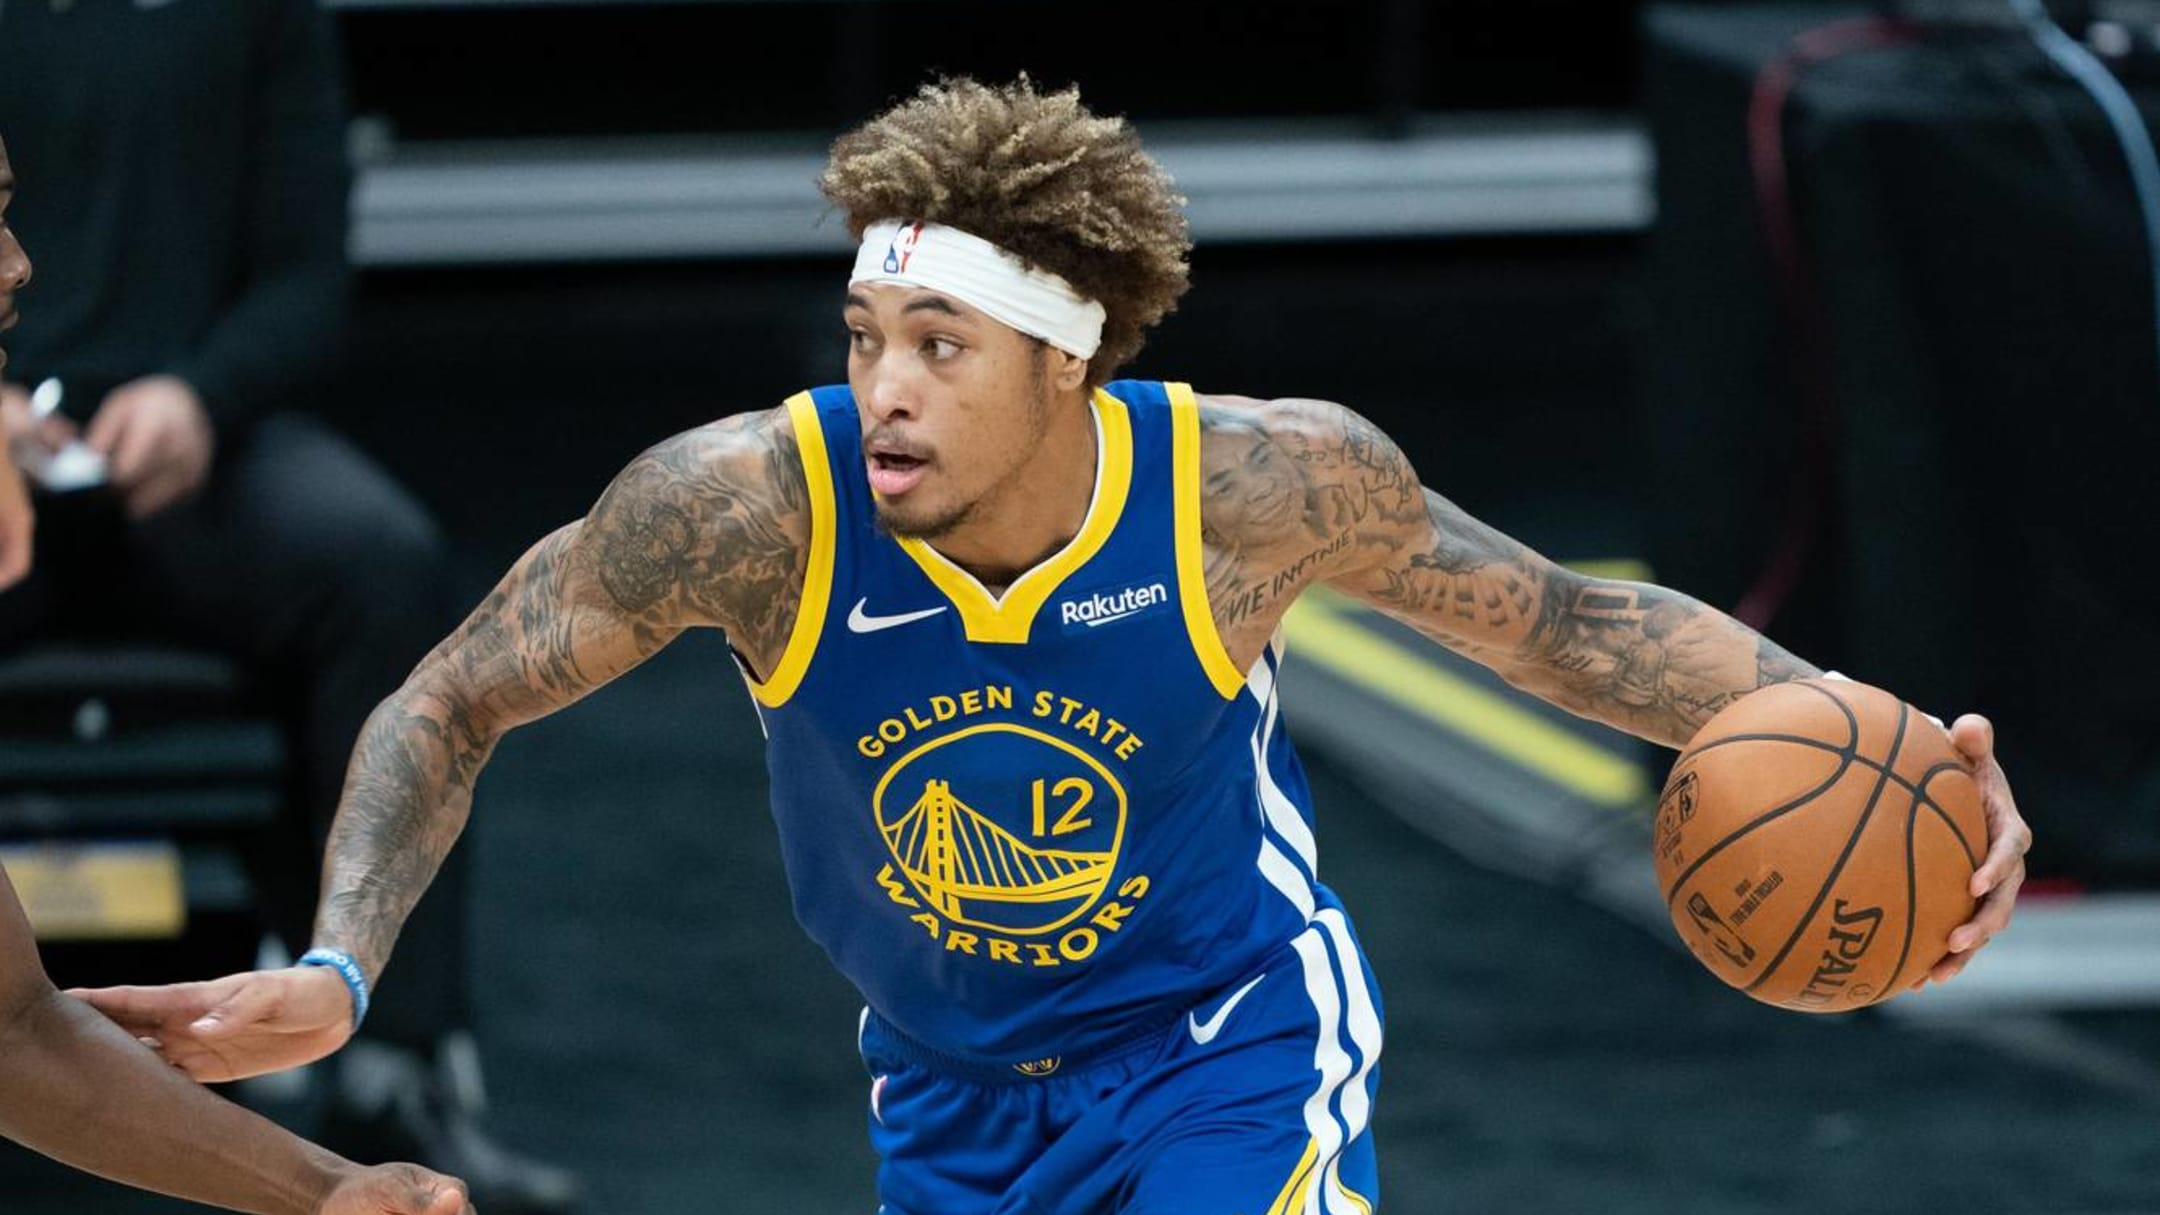 Golden State Warriors: Kelly Oubre has been shooting better than Curry